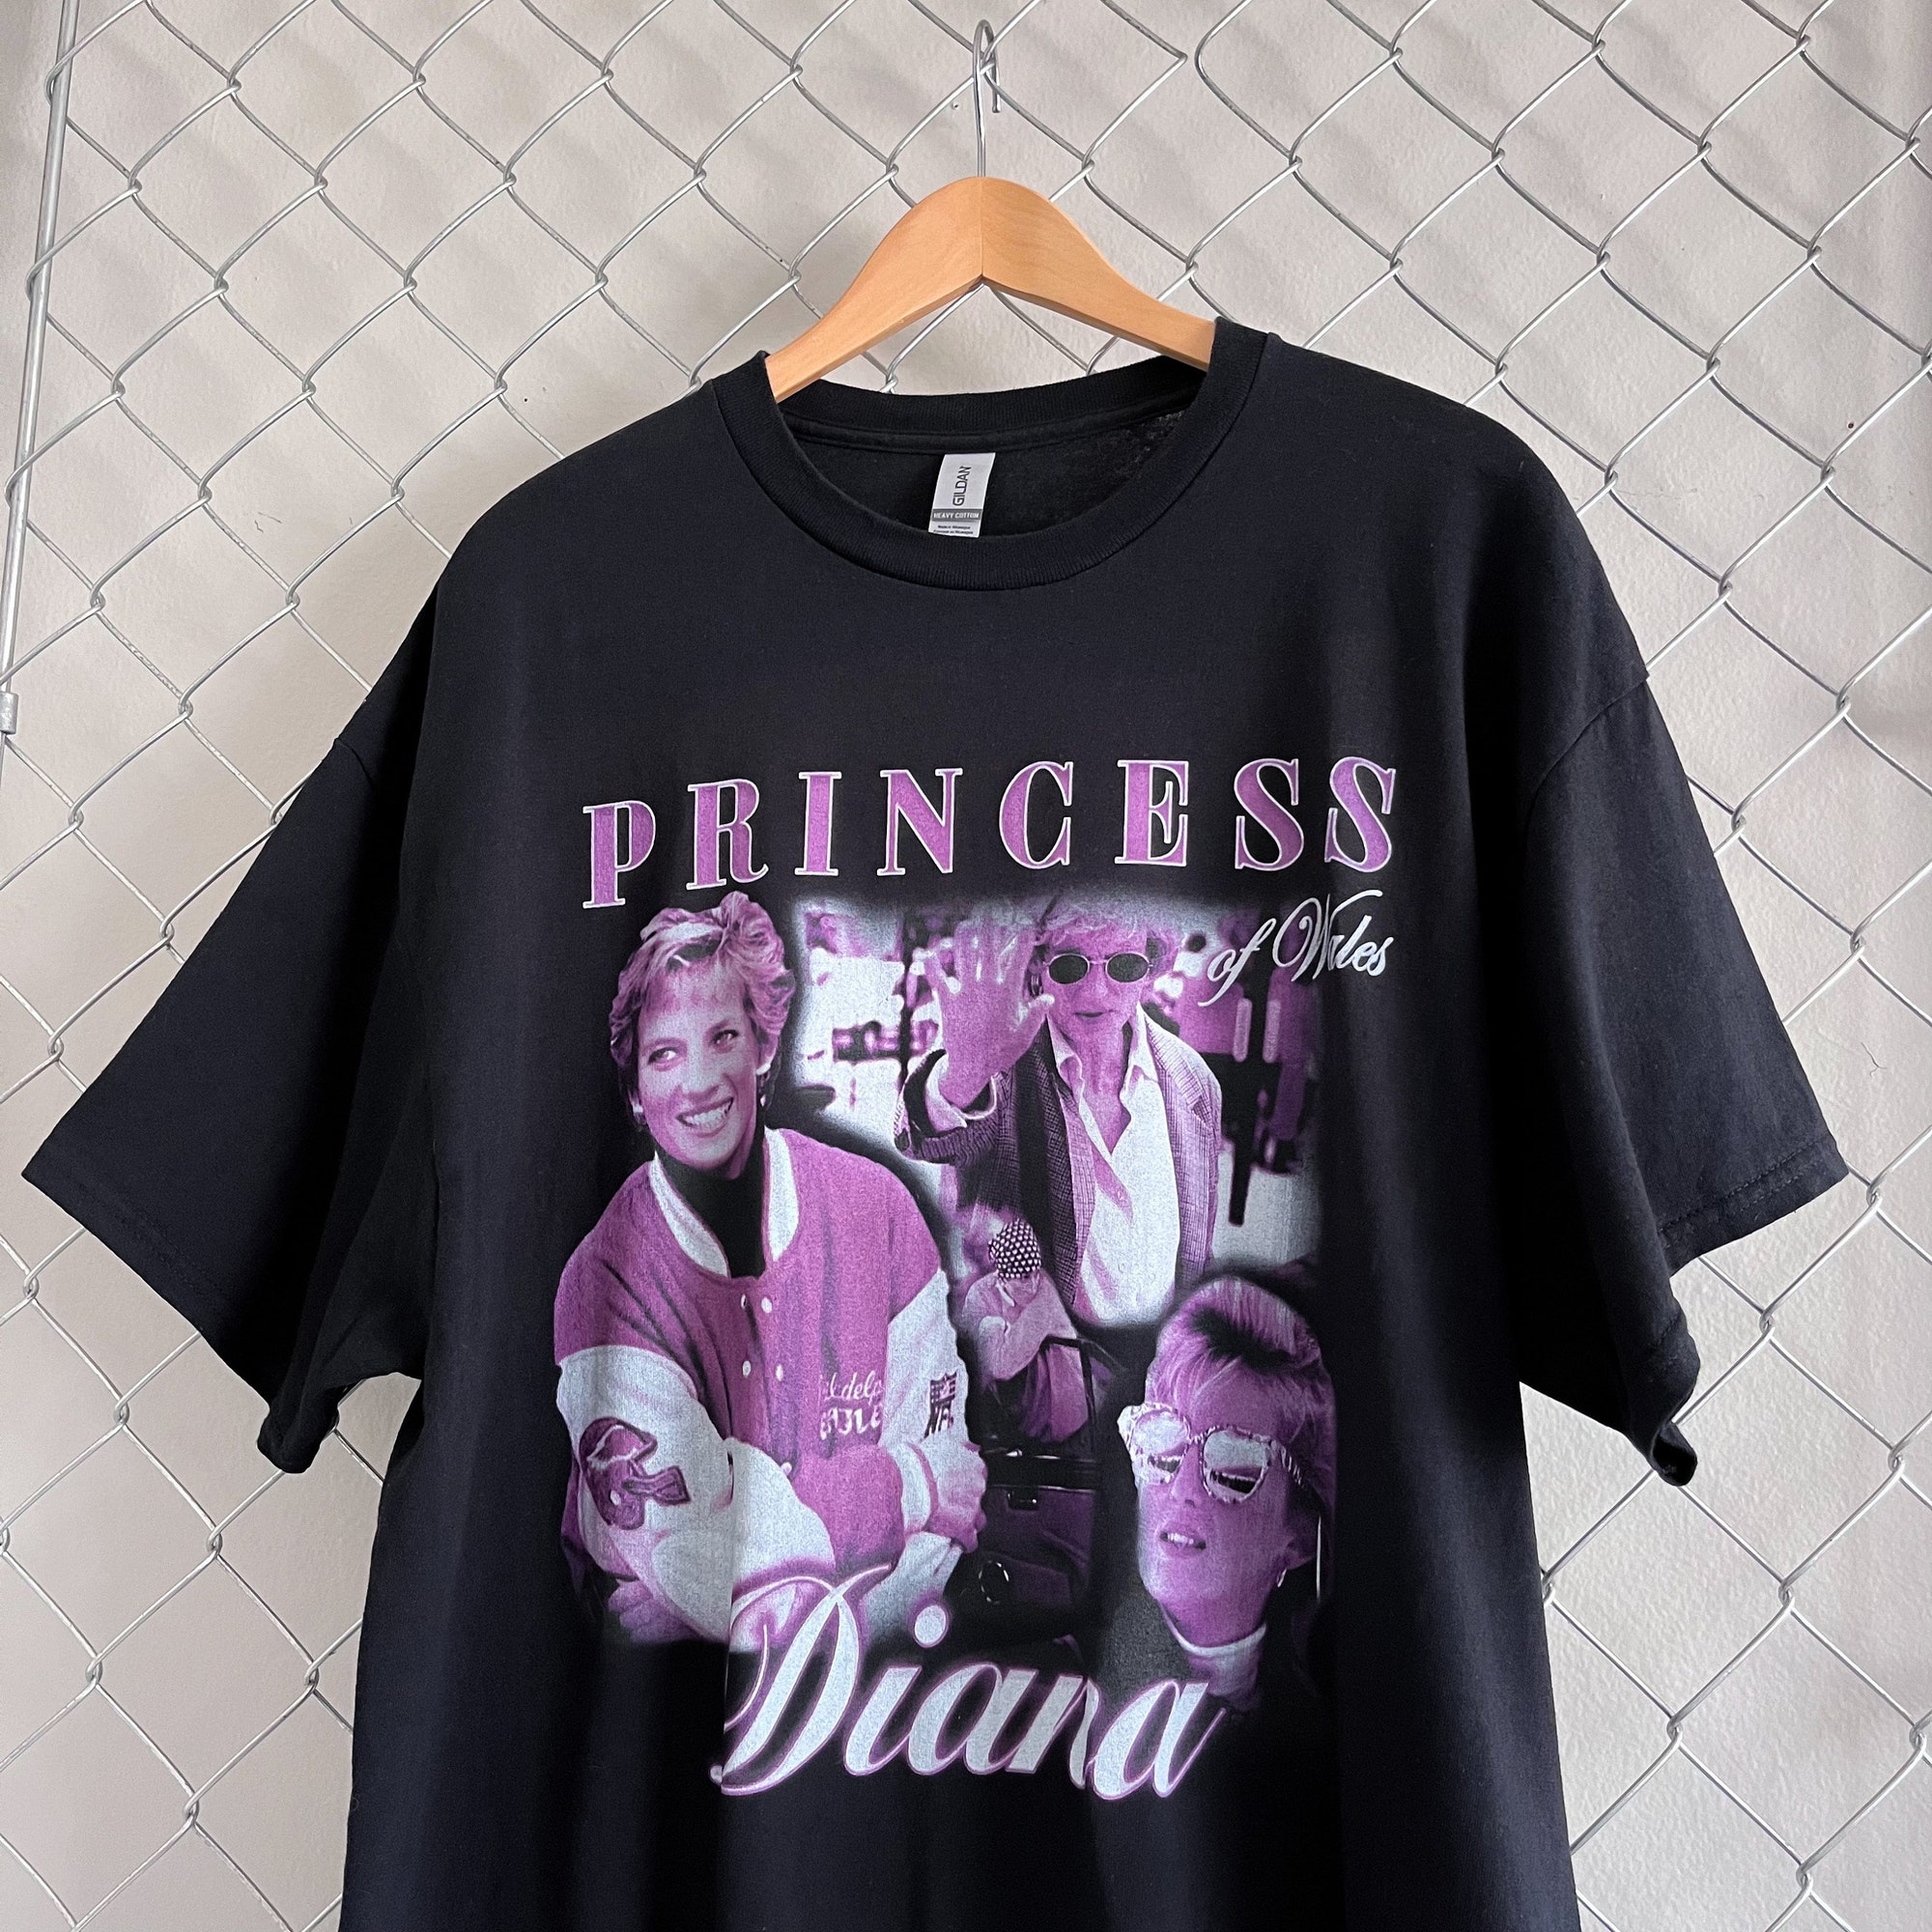 Vintage Style Princess Diana Of Wales Graphic Tee